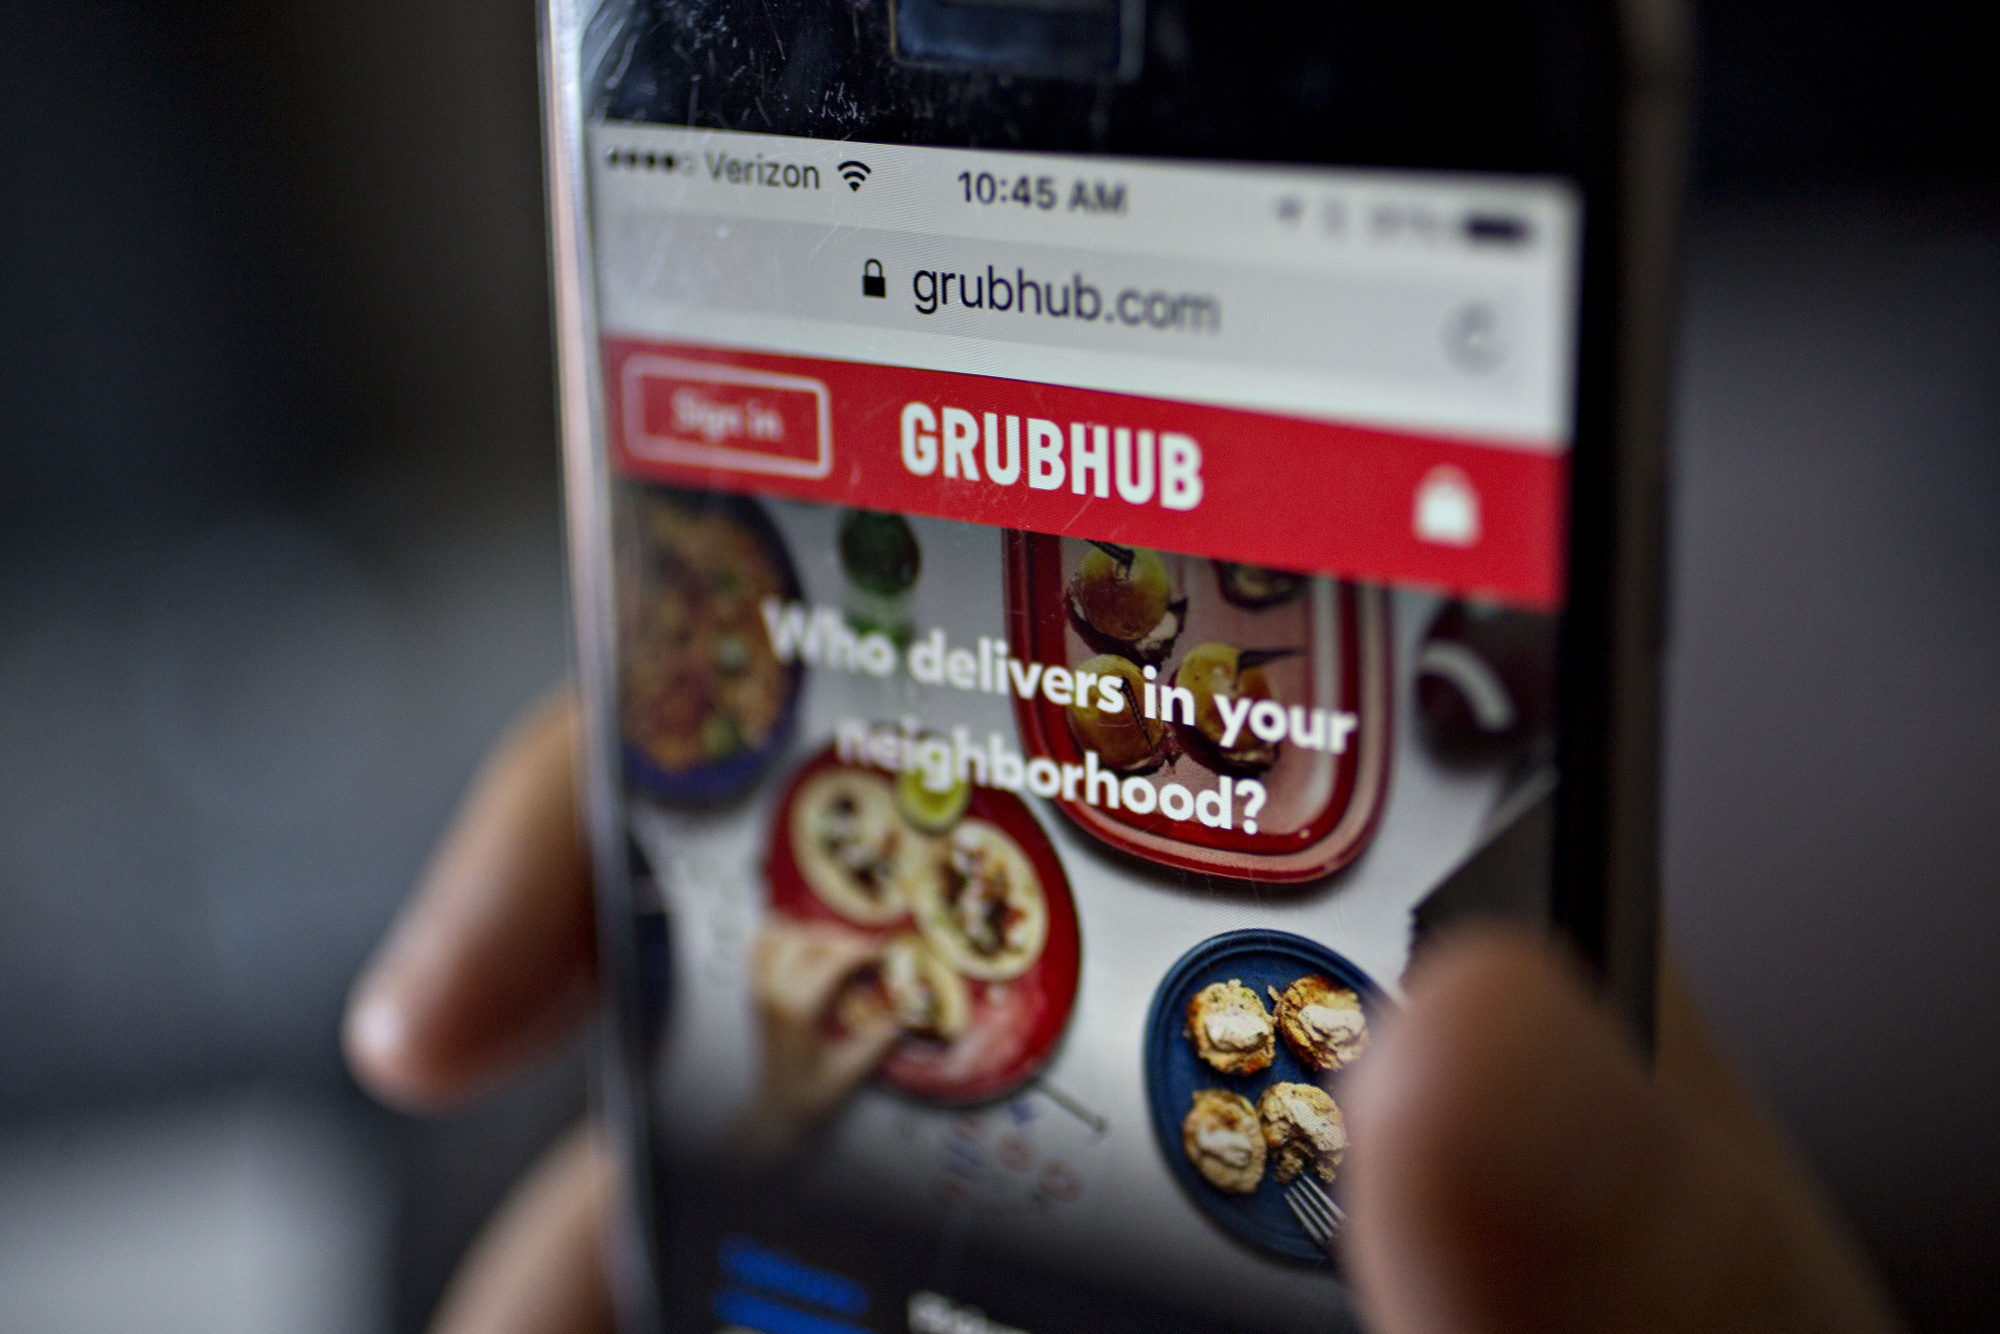 The GrubHub Inc. website is demonstrated for a photograph on an Apple Inc. iPhone in Washington, D.C., U.S., on Saturday, Feb. 4, 2017. GrubHub is scheduled to release earnings figures on February 8.